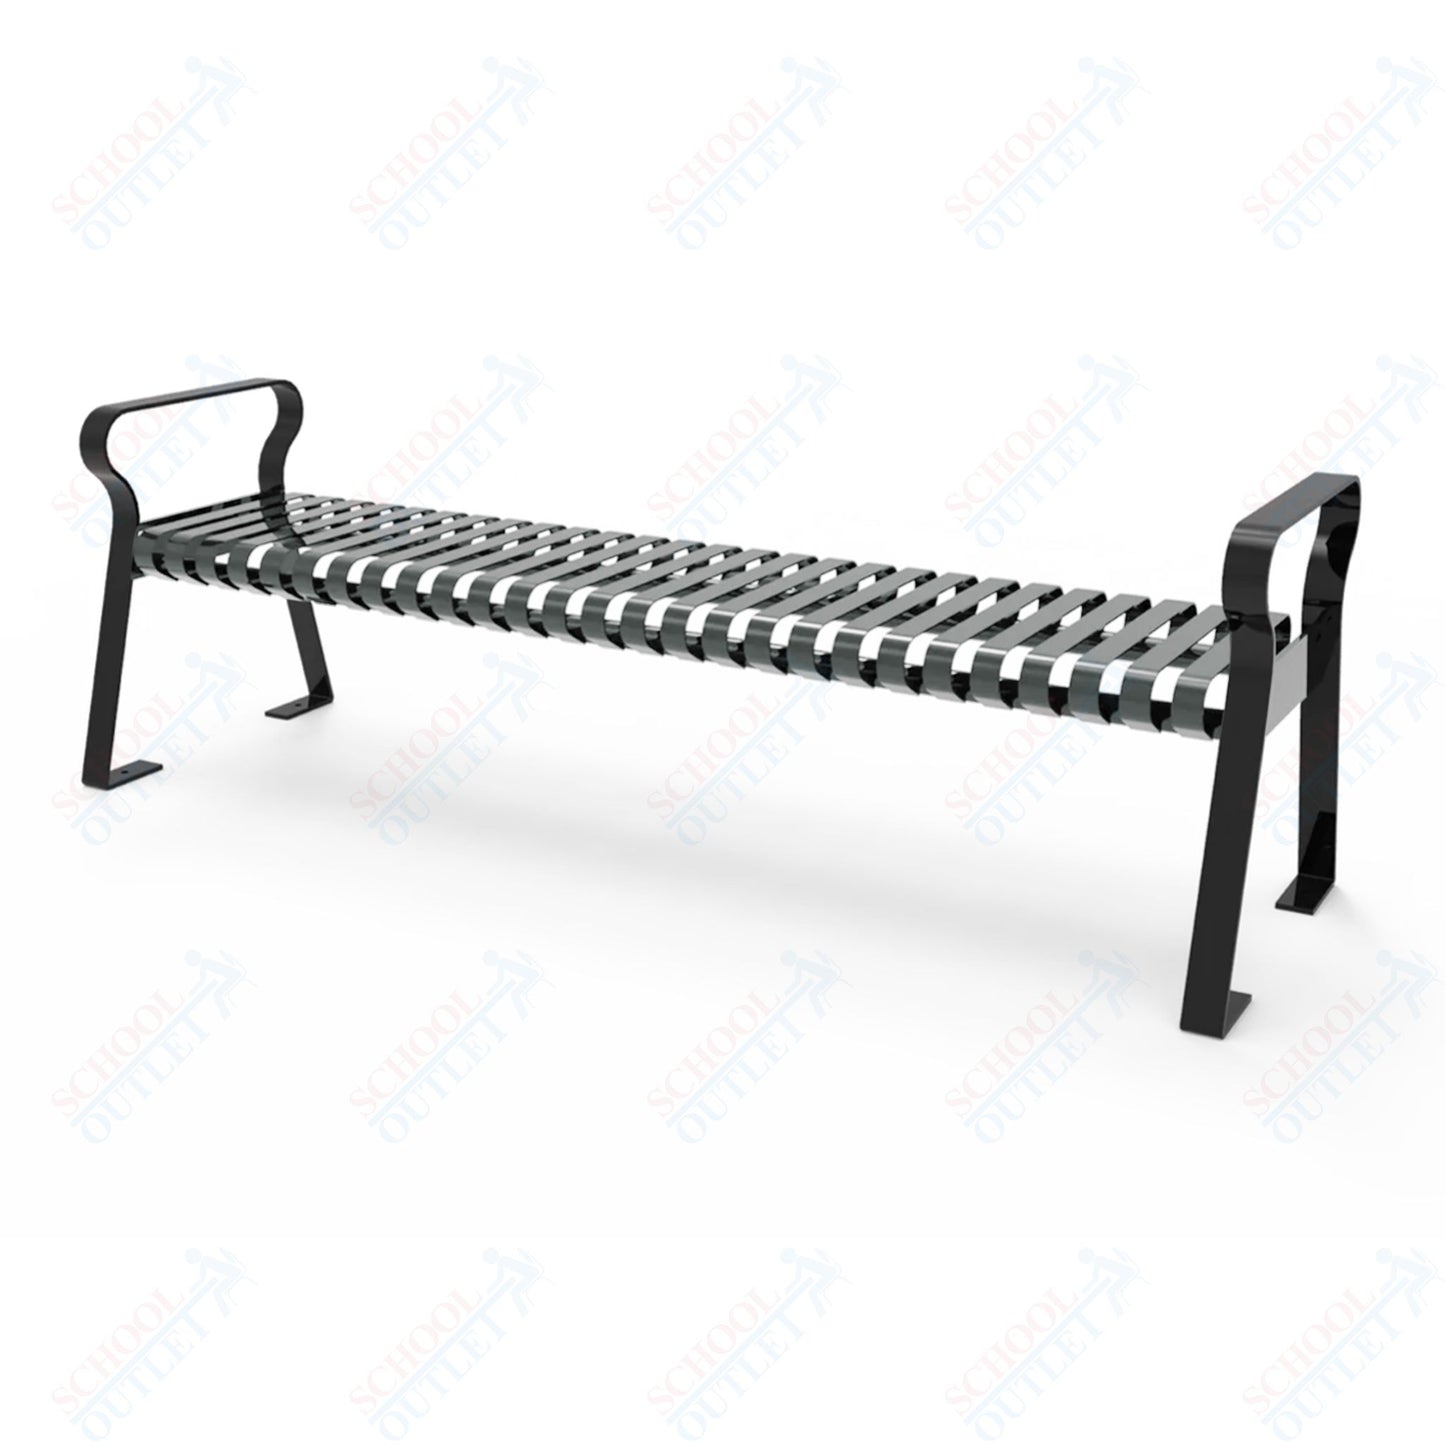 MyTcoat - Downtown Outdoor Bench Without back - Strap Metal - Portable or Surface Mount 4' L (MYT-BDT04-L-56)